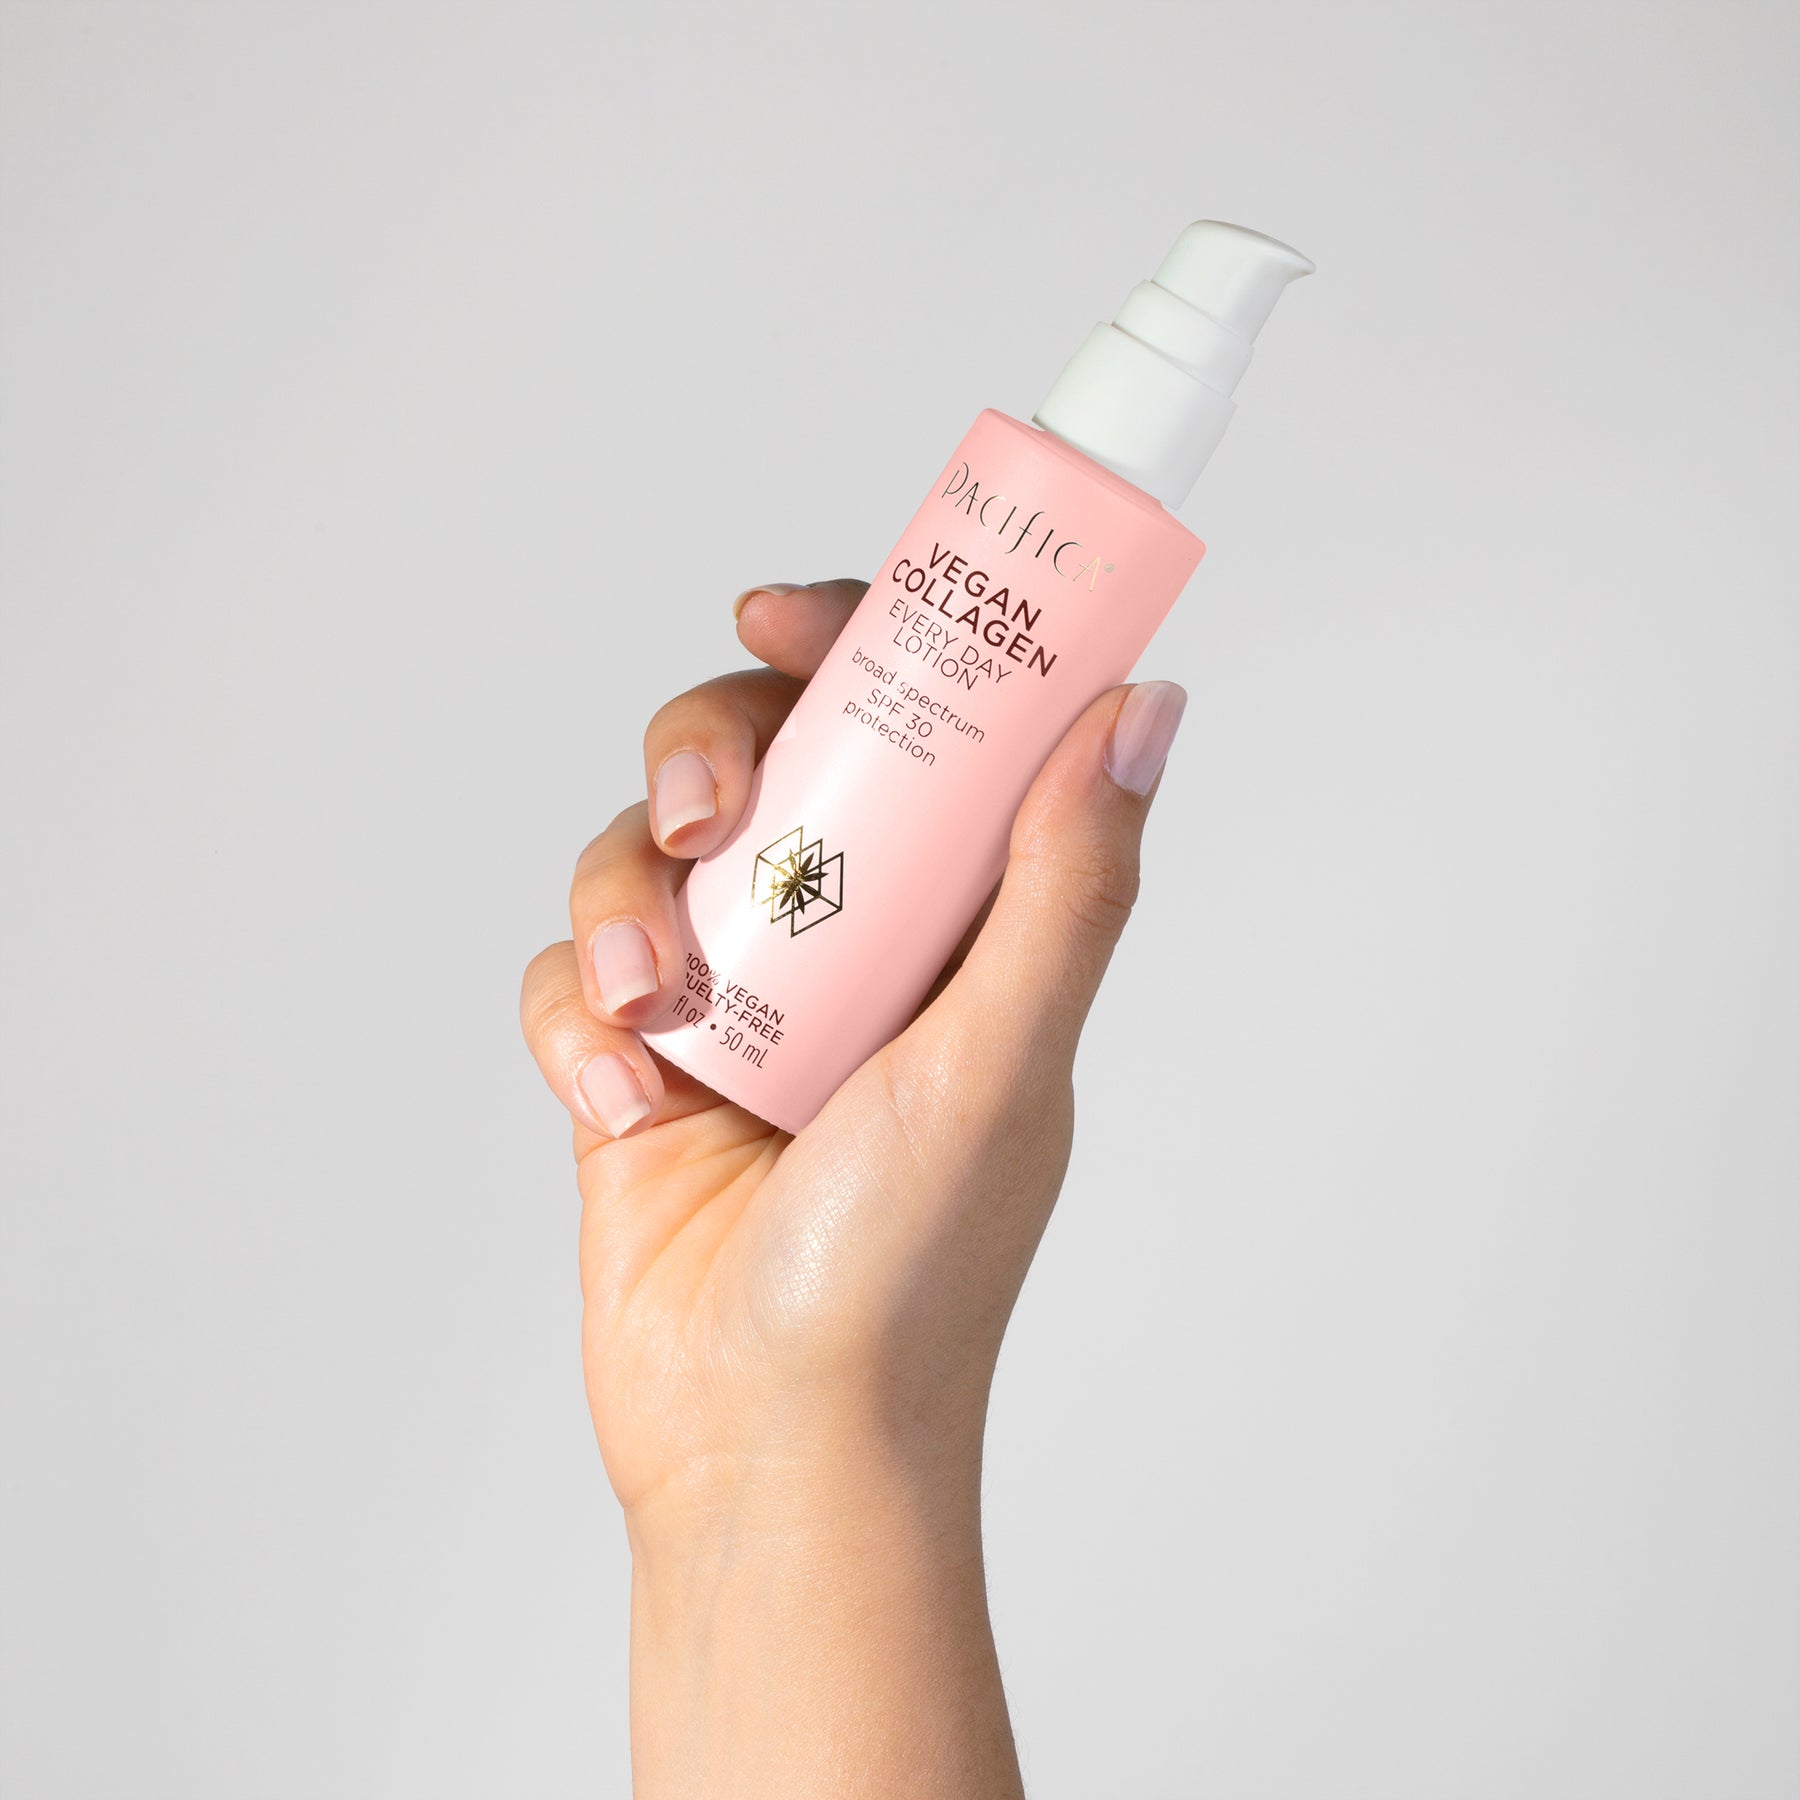 Open doors on the first try with our NEW natural lotion, made with a l